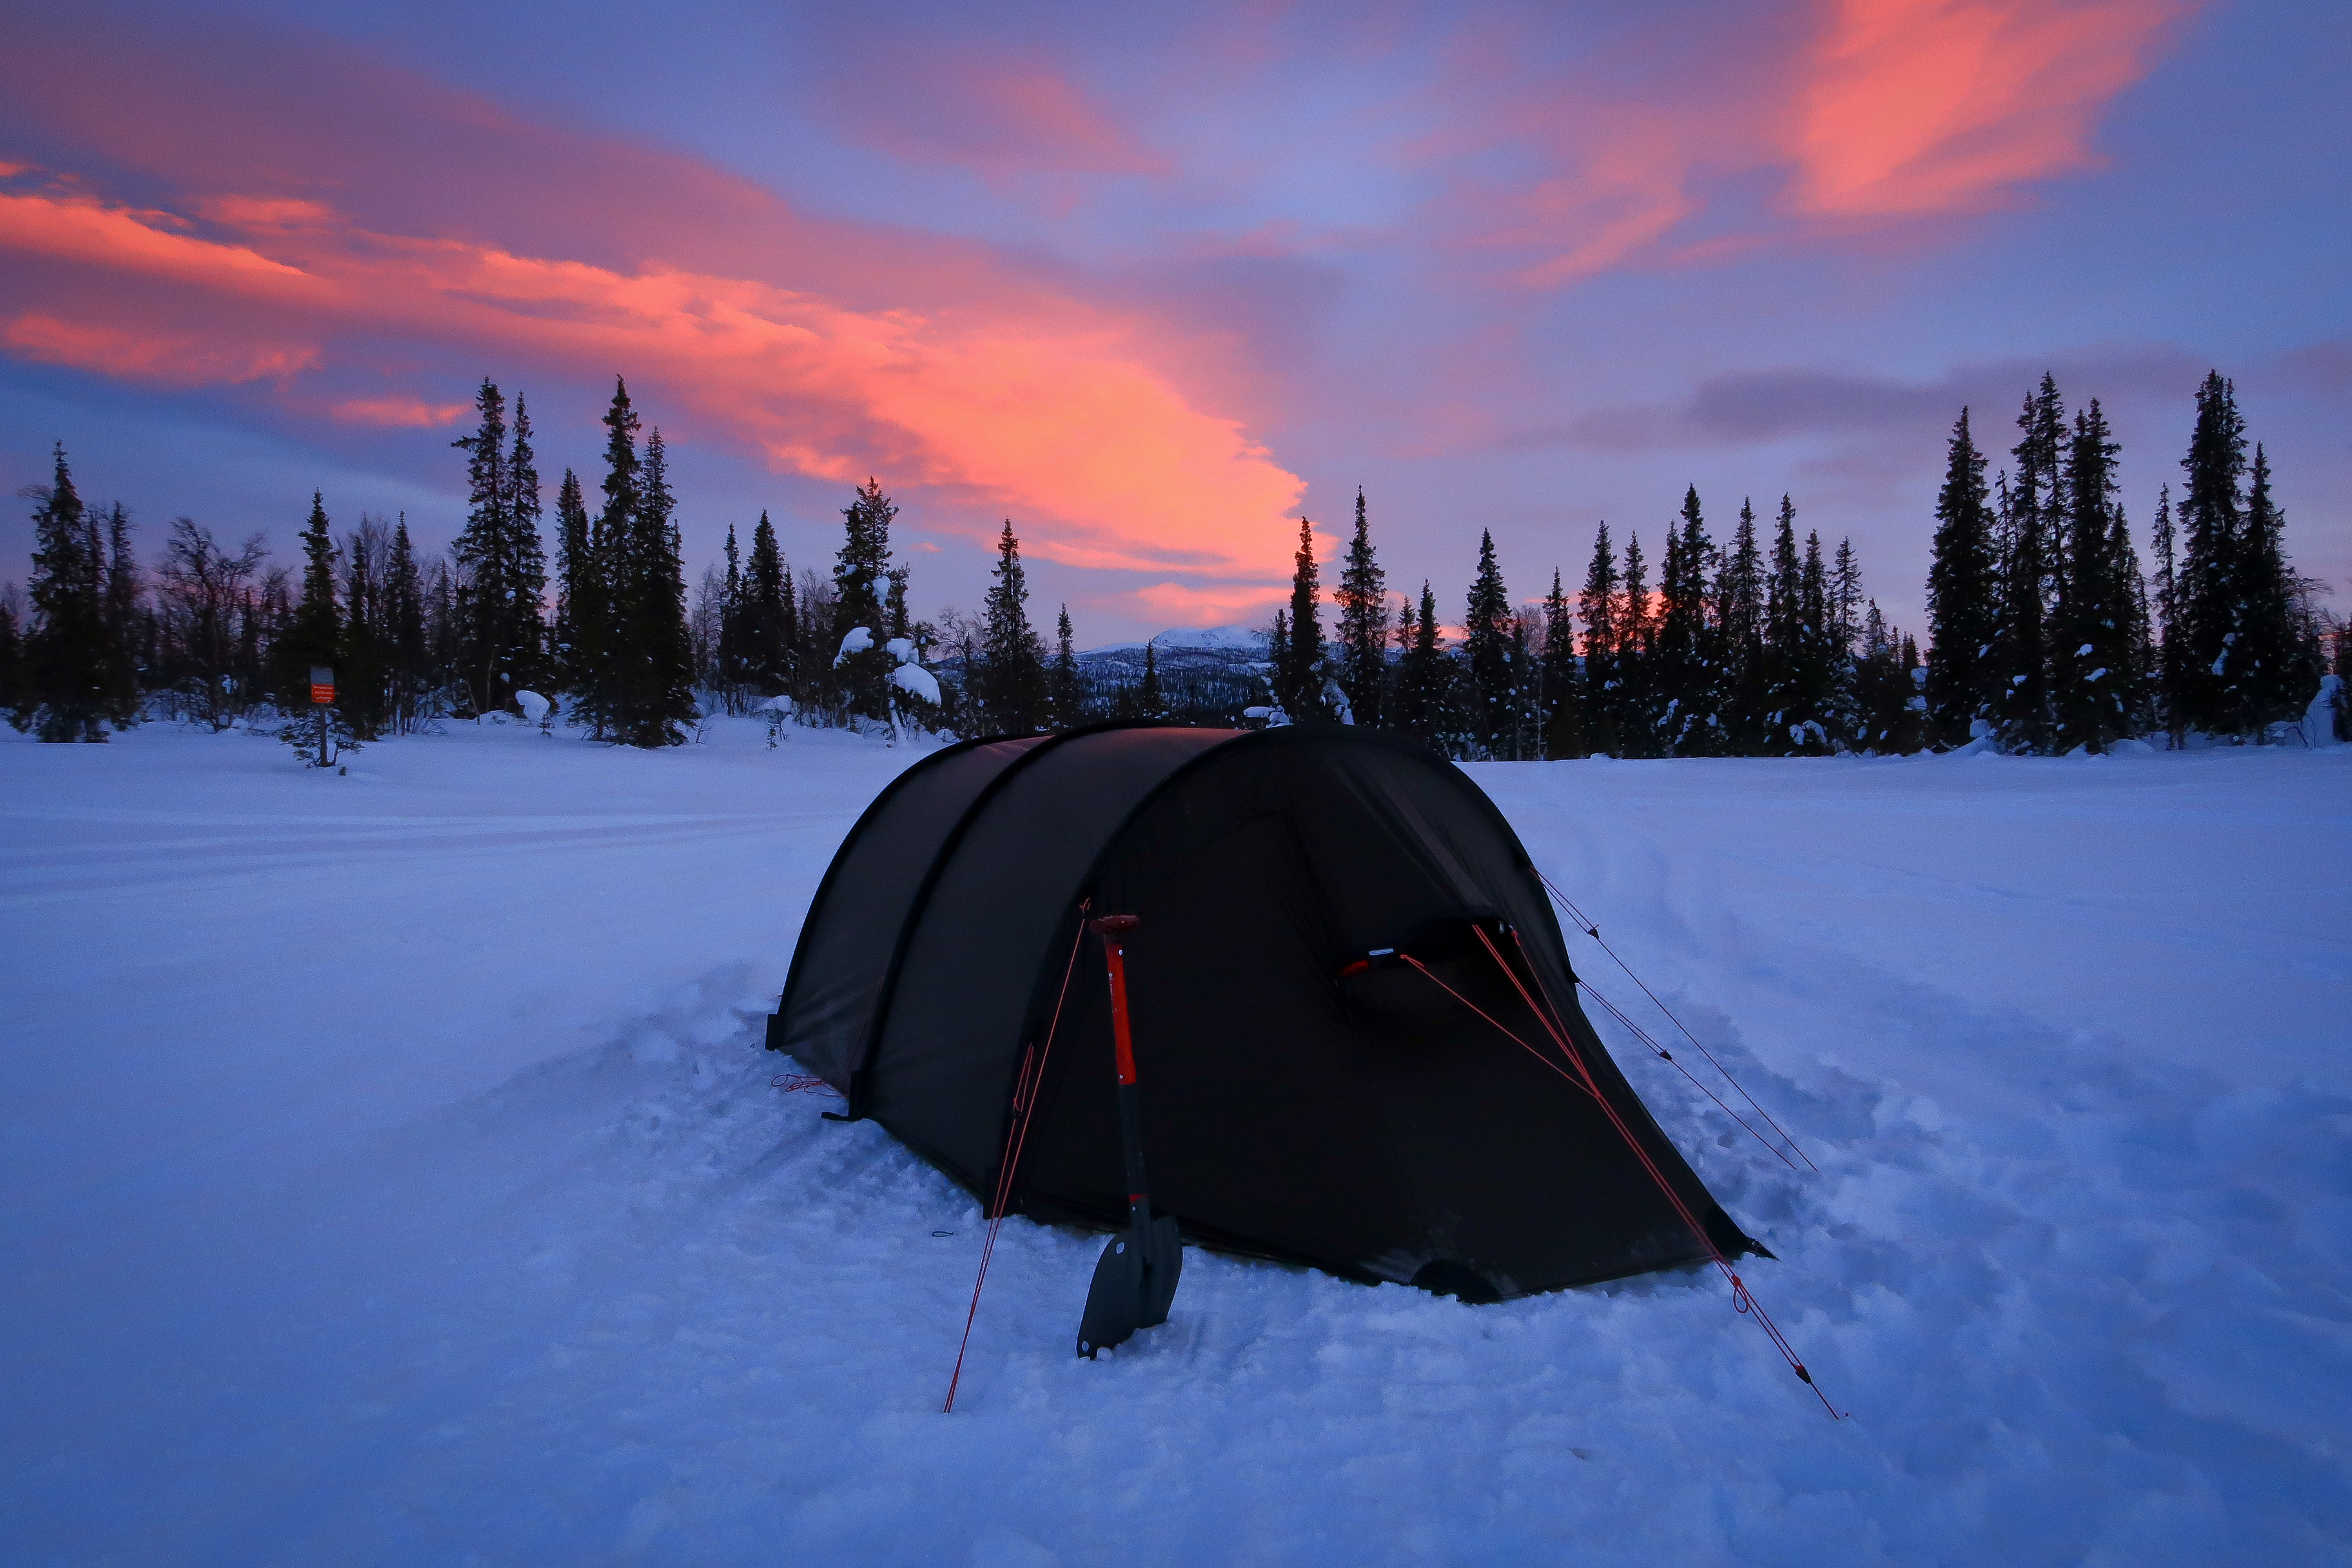 Tent pitched on the only hard snow around